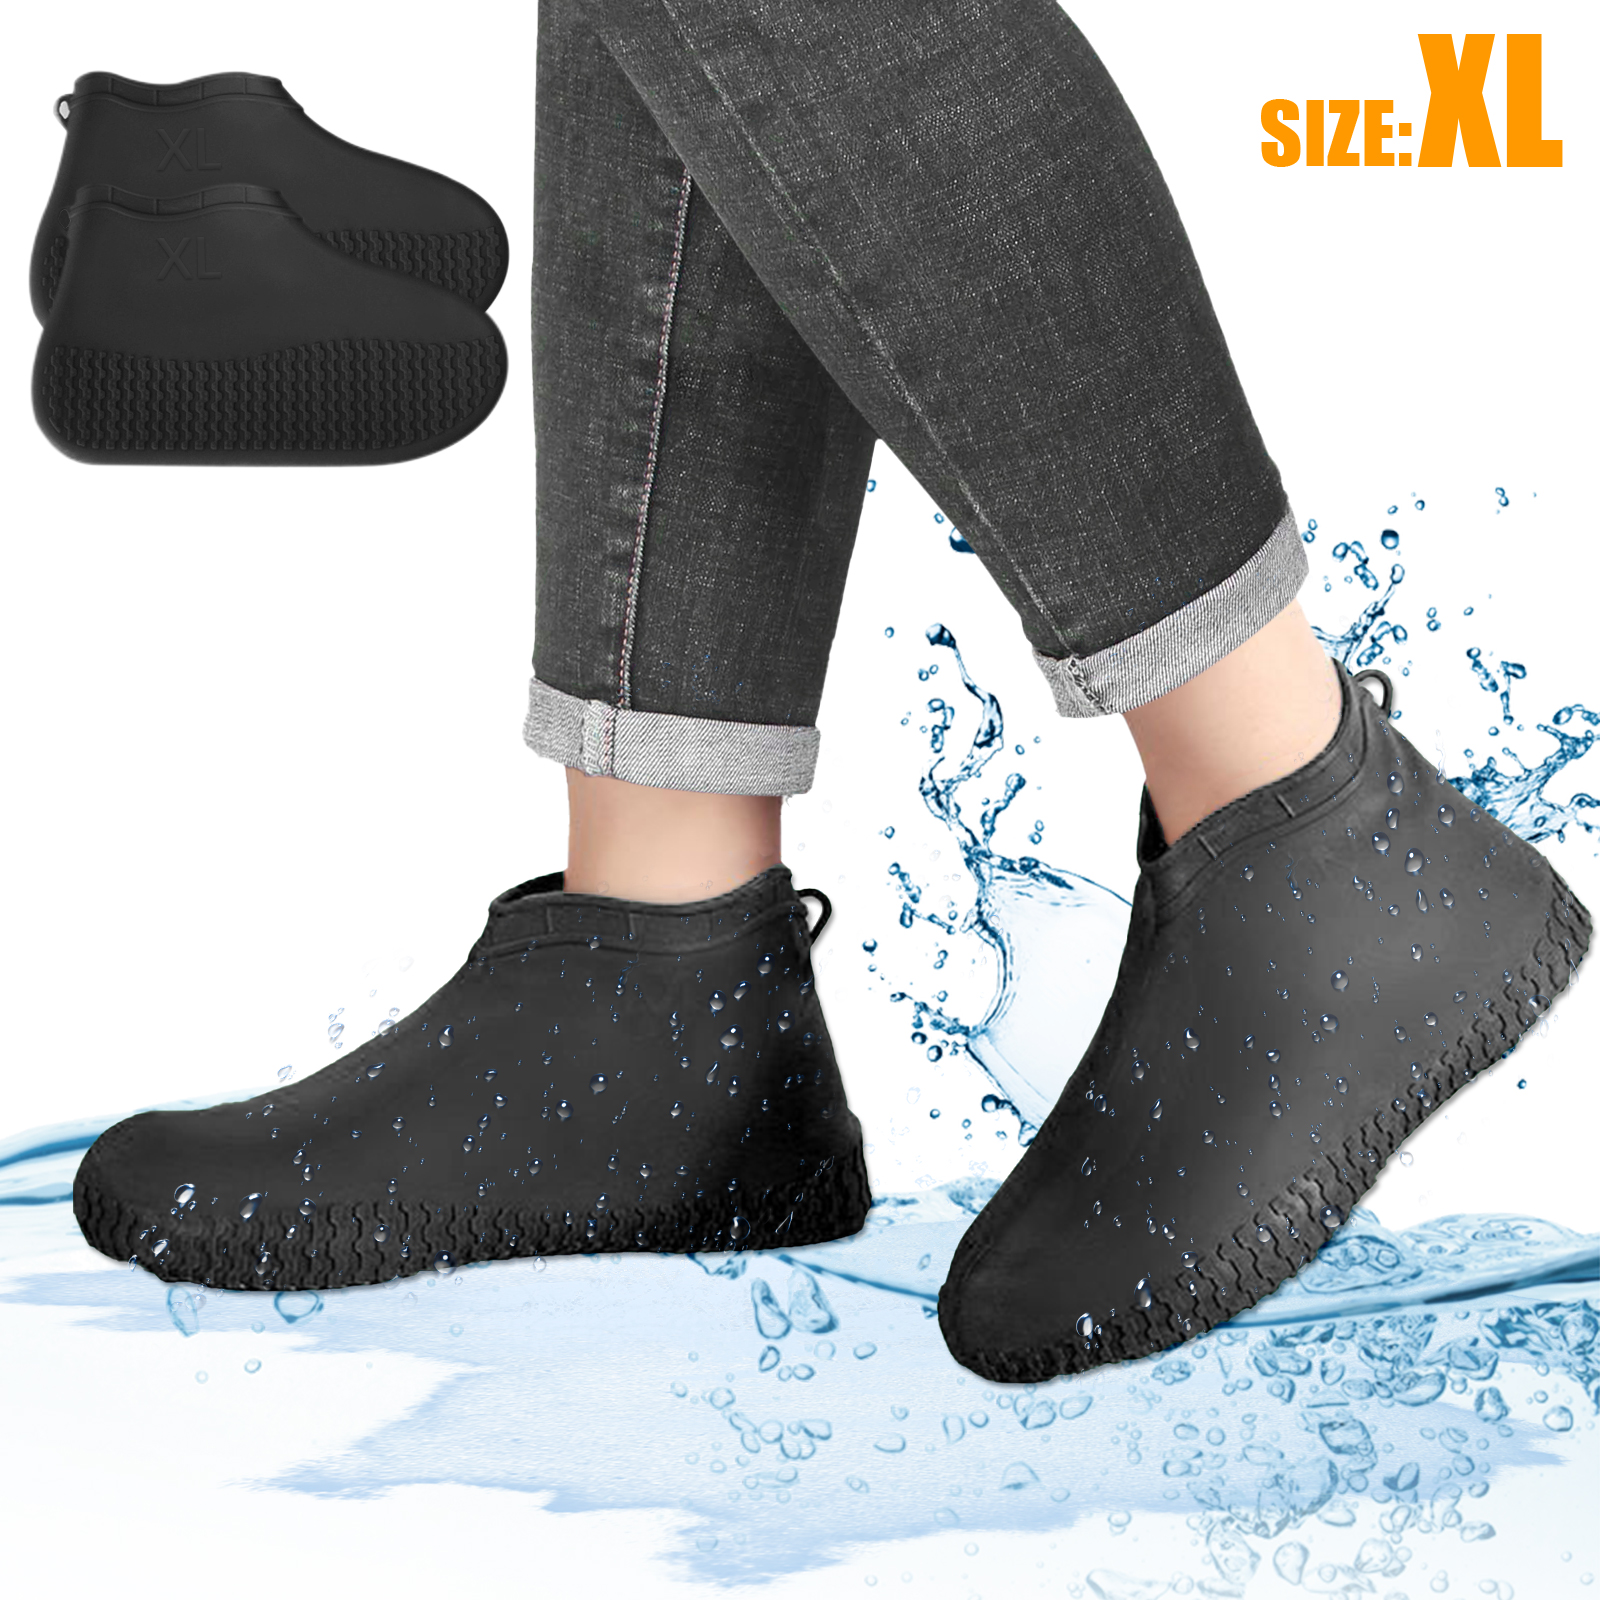 2X Silicone Rain Shoes Covers Reusable Rain Boots Protection Non-slip Waterproof 